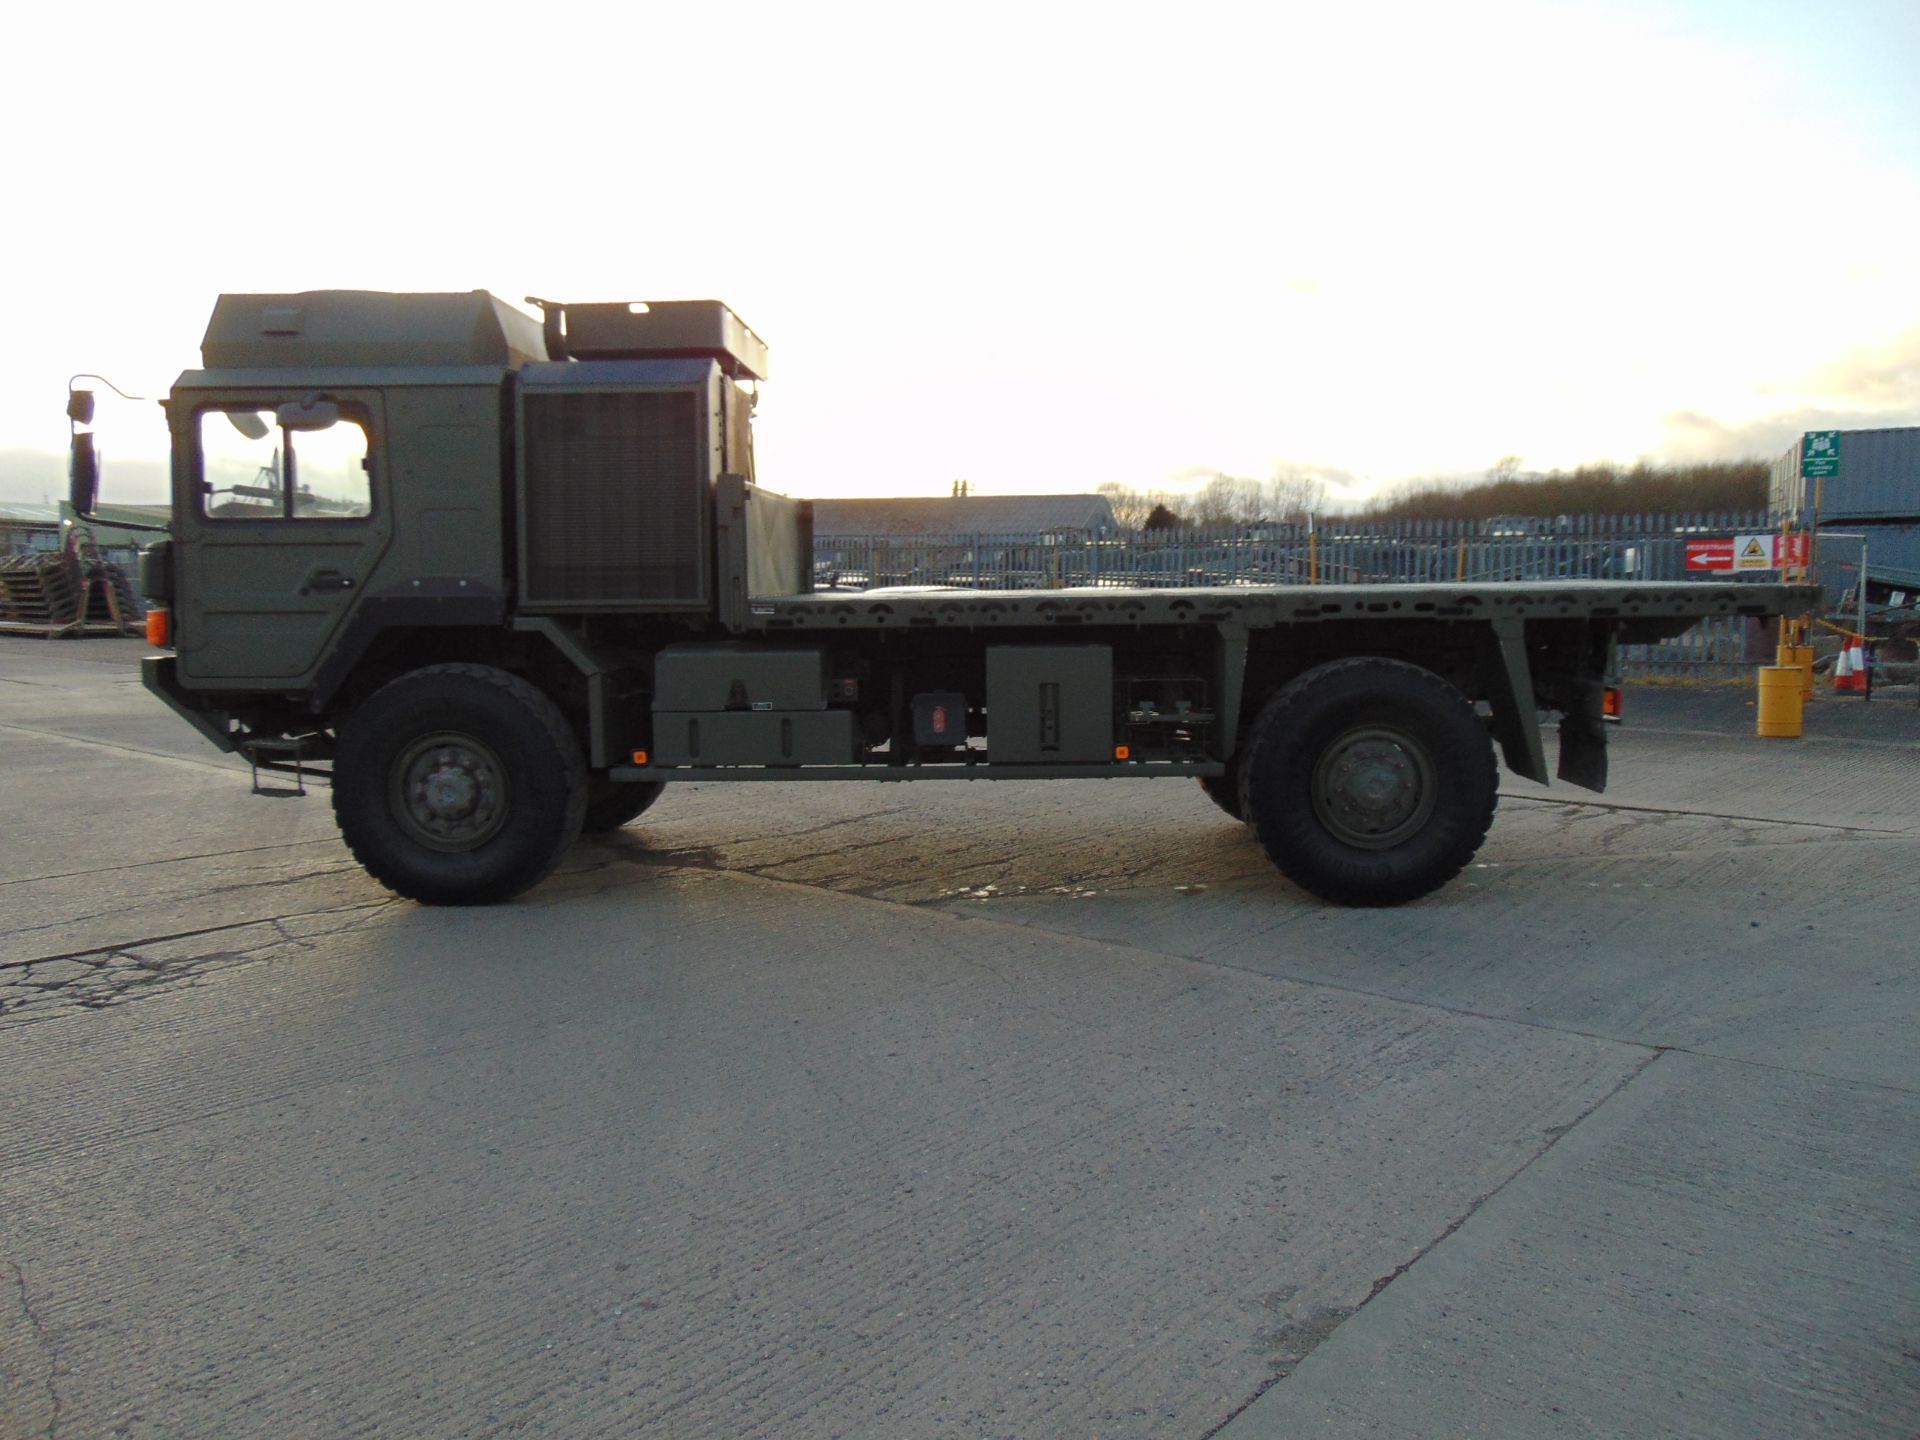 Recent Release MAN 4X4 HX60 18.330 FLAT BED CARGO TRUCK - Image 4 of 25